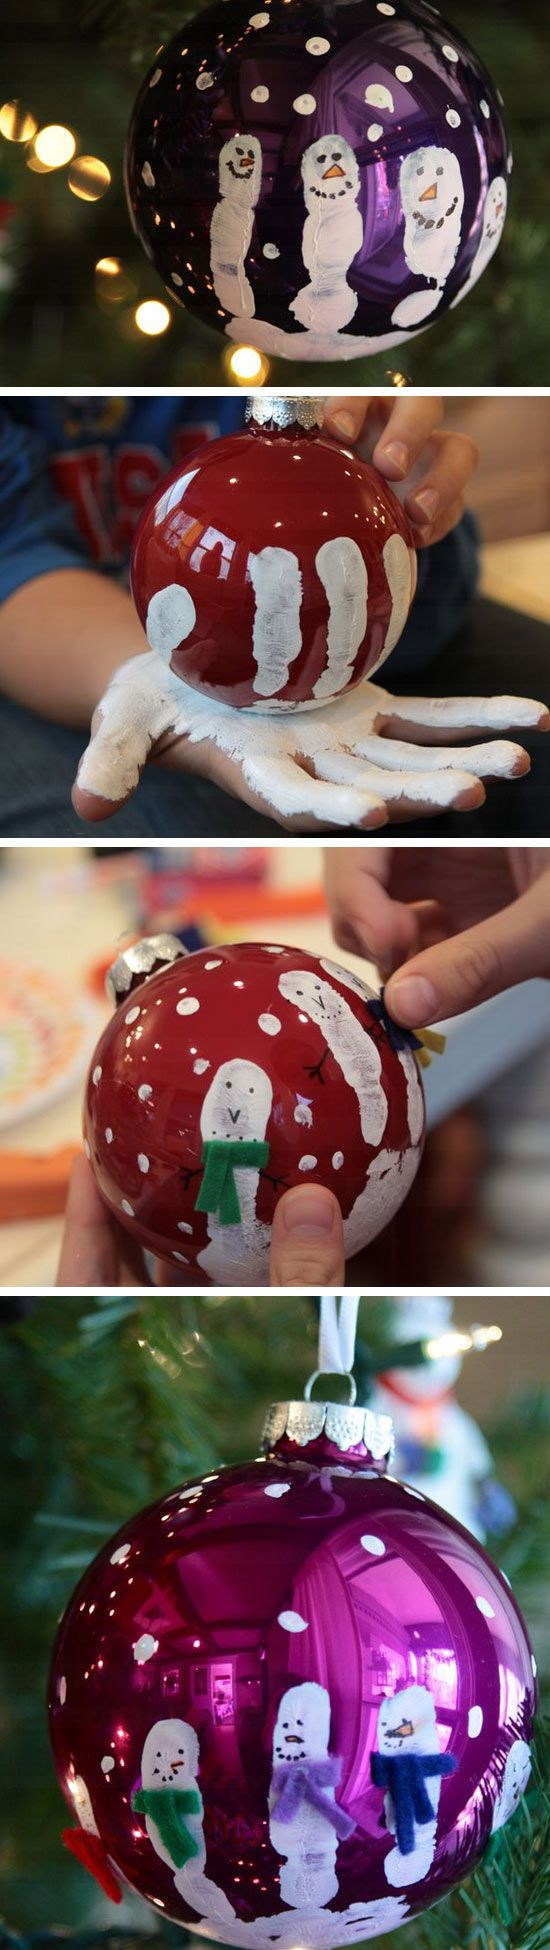 DIY Crafts For Kids
 Easy and Cute DIY Christmas Crafts for Kids to Make Hative